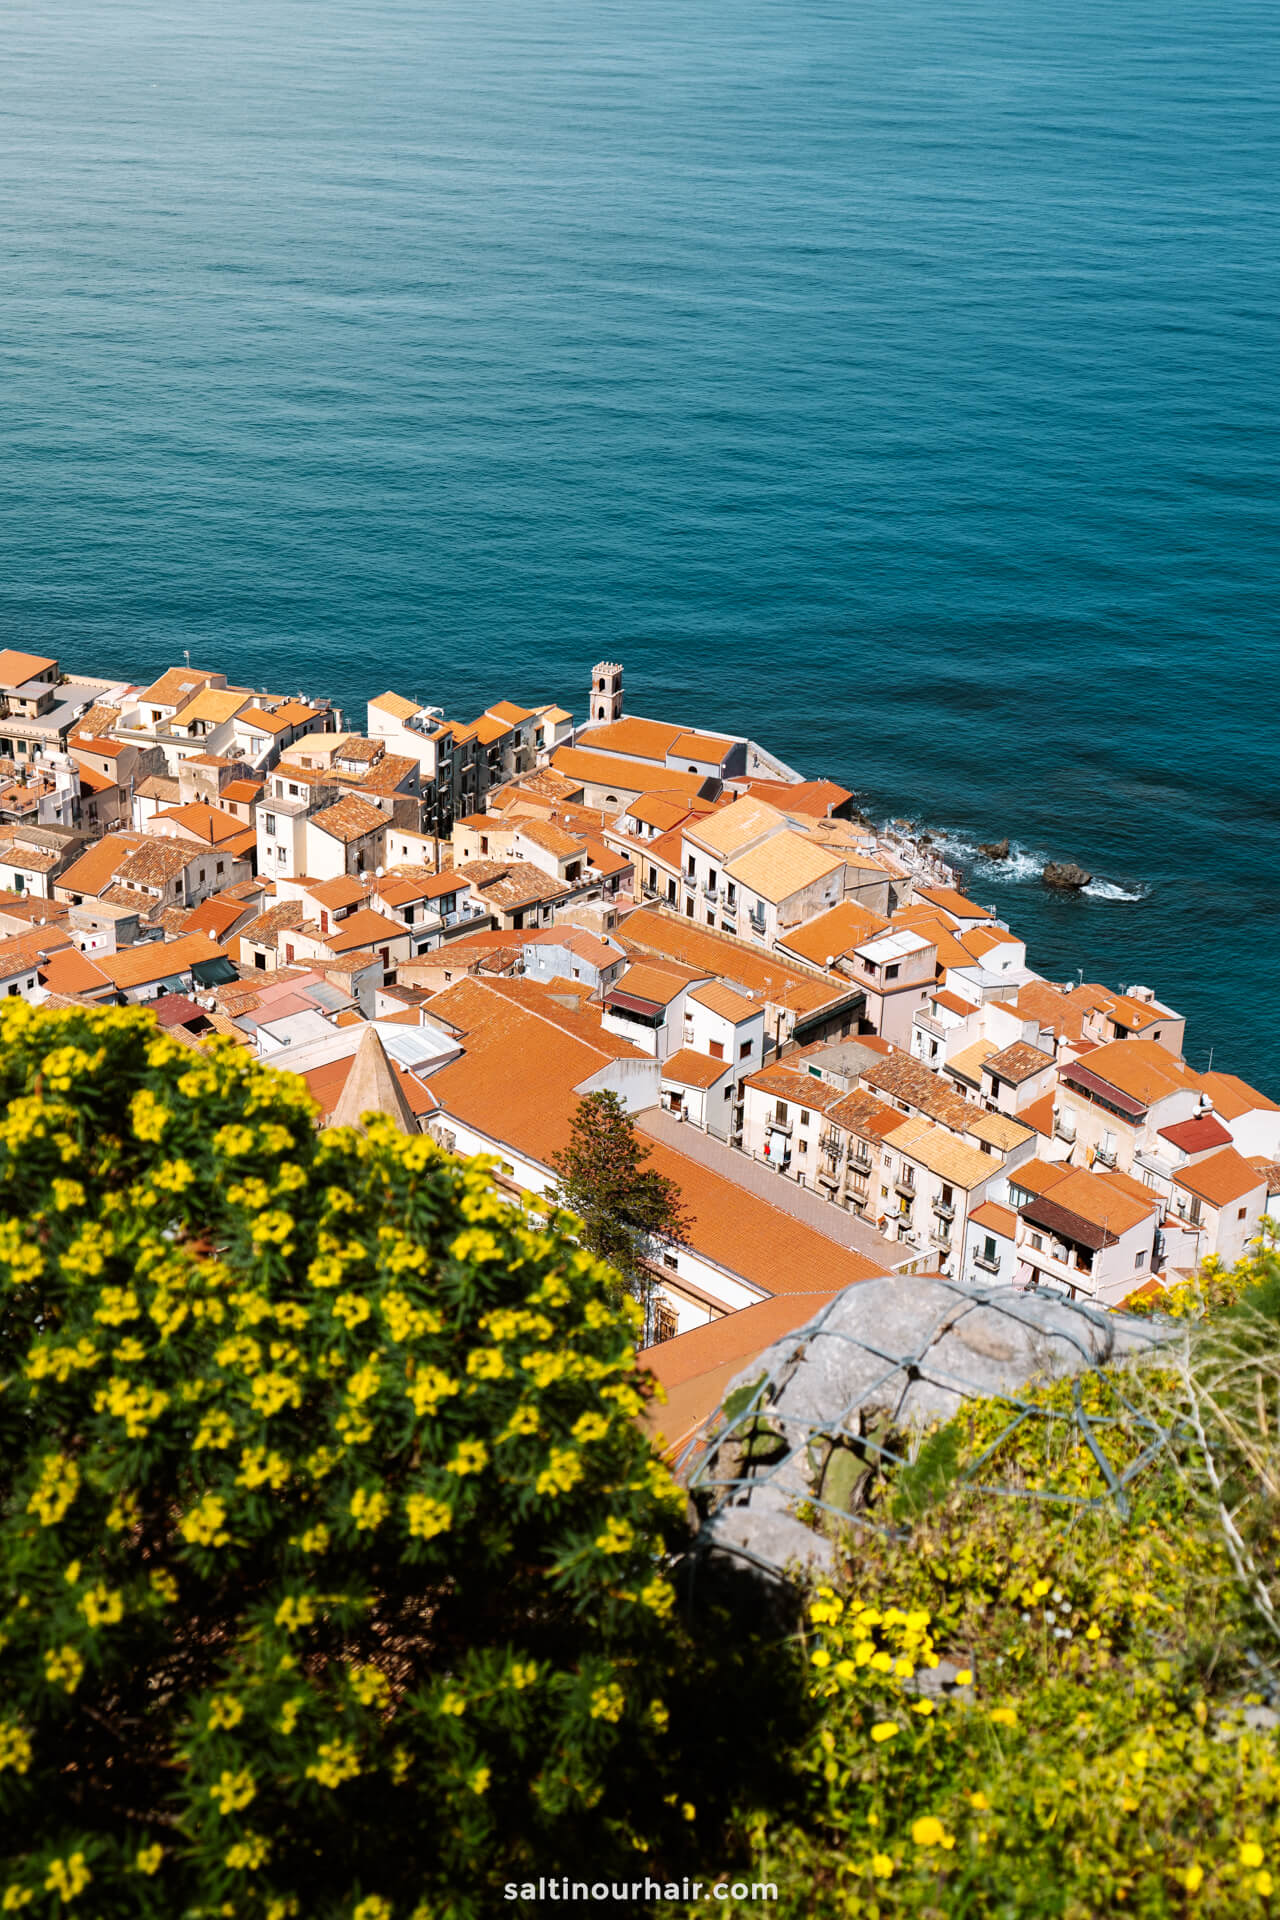 Best panoramic Viewpoints in CefalÃ¹